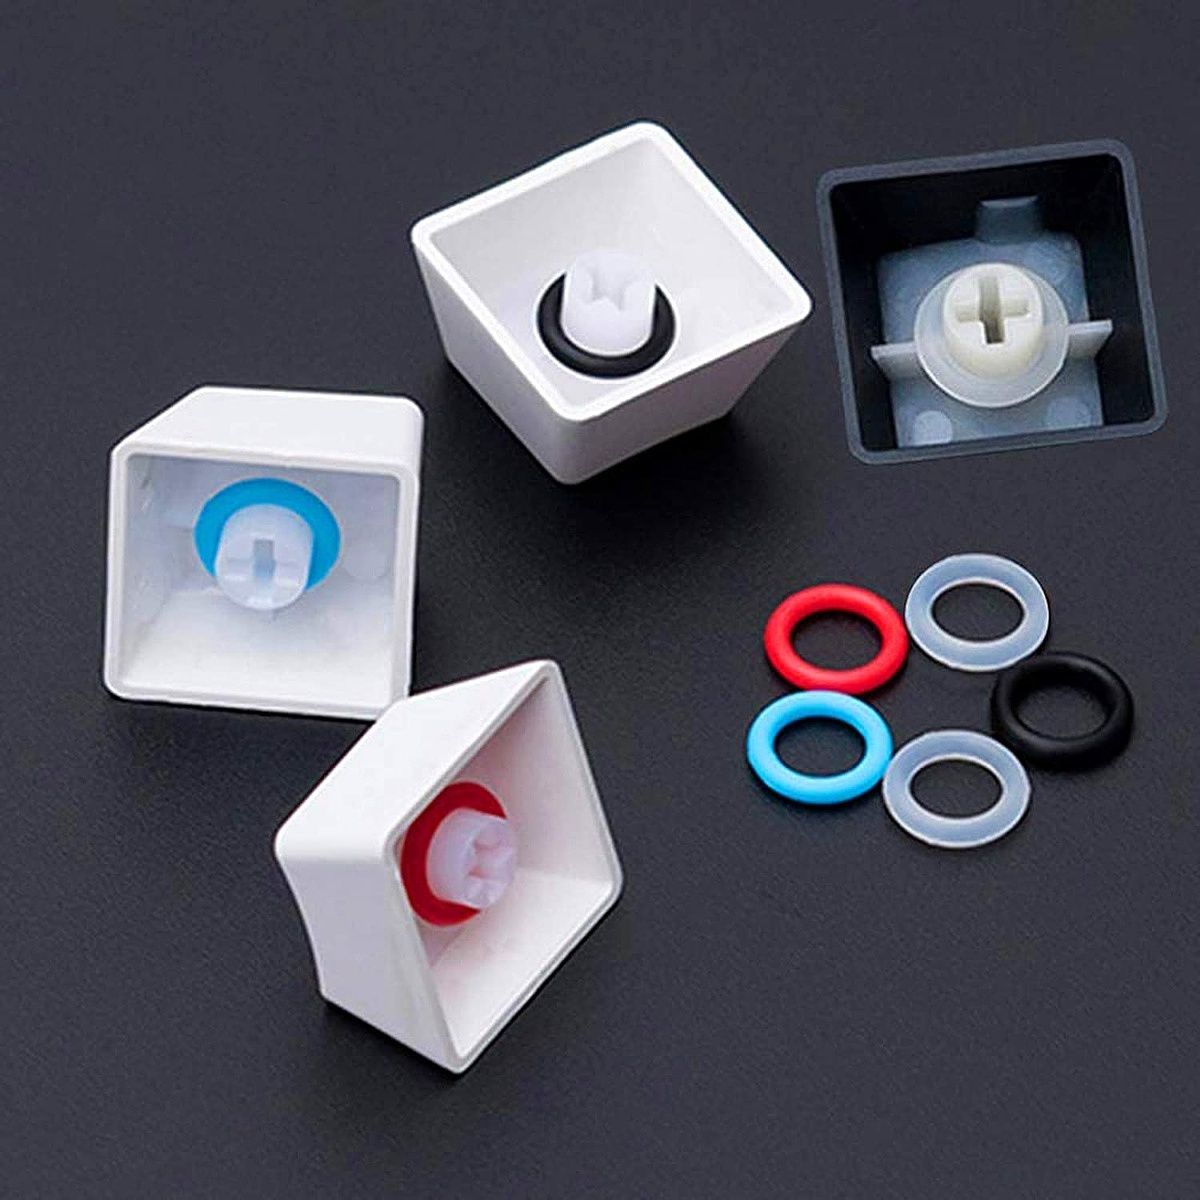 A set of 120 o-rings to help you dampen keystrokes while typing and reduce plastic clacking.